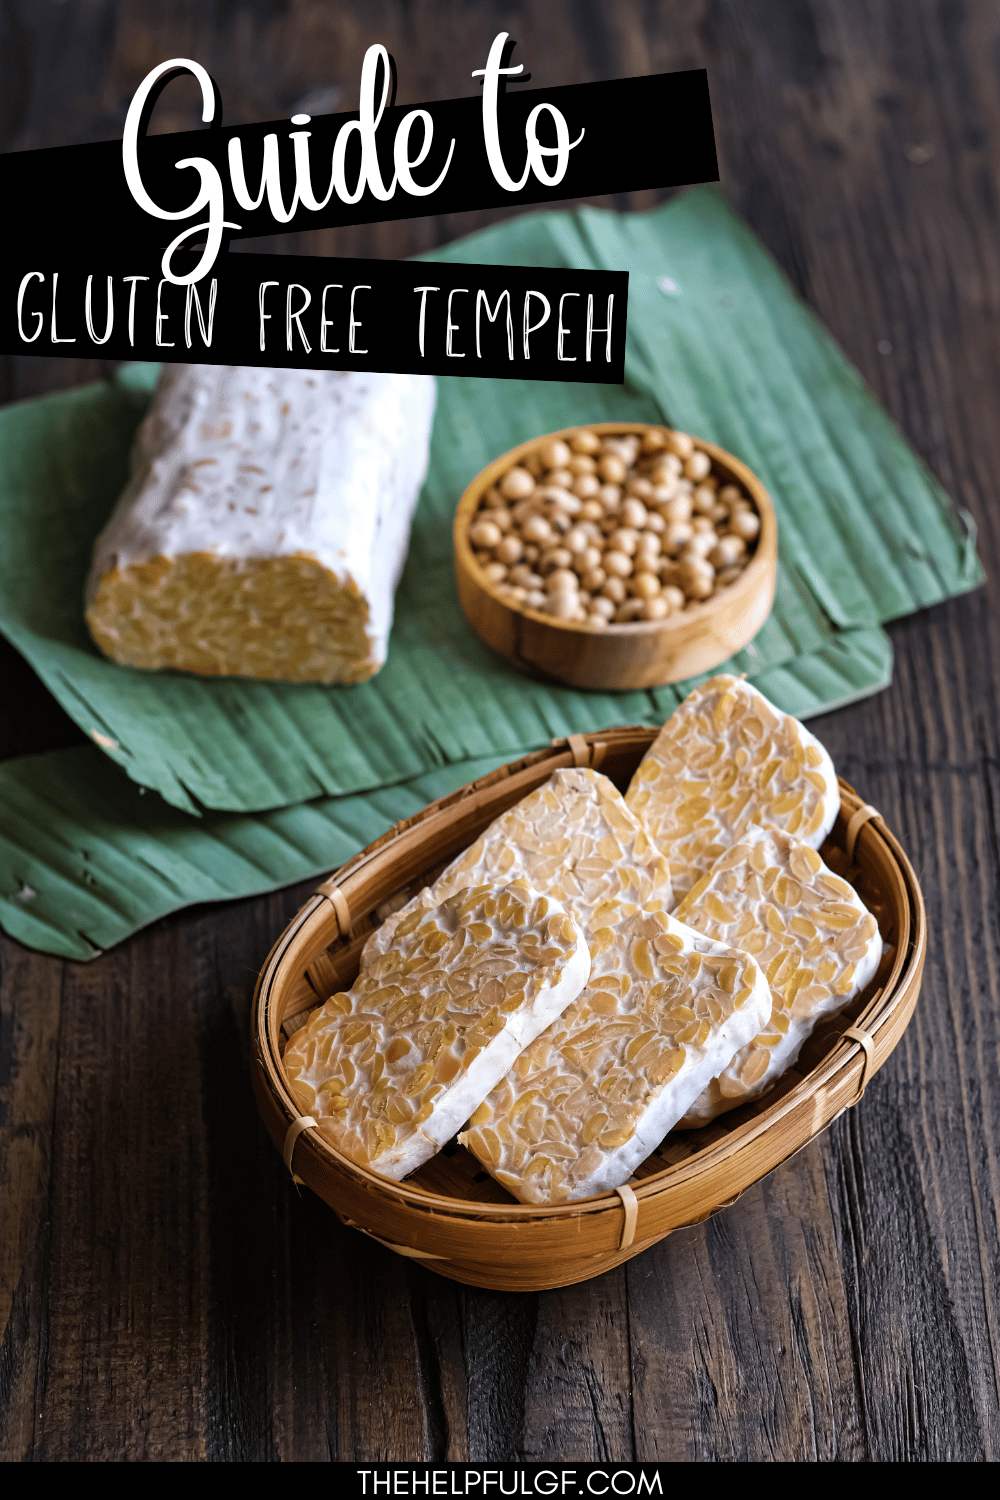 A basked of sliced tempeh, a bowl of soy beans and a loaf of tempeh sitting on a wooden surface with a text overlay that says 'Guide to Gluten Free Tempeh'